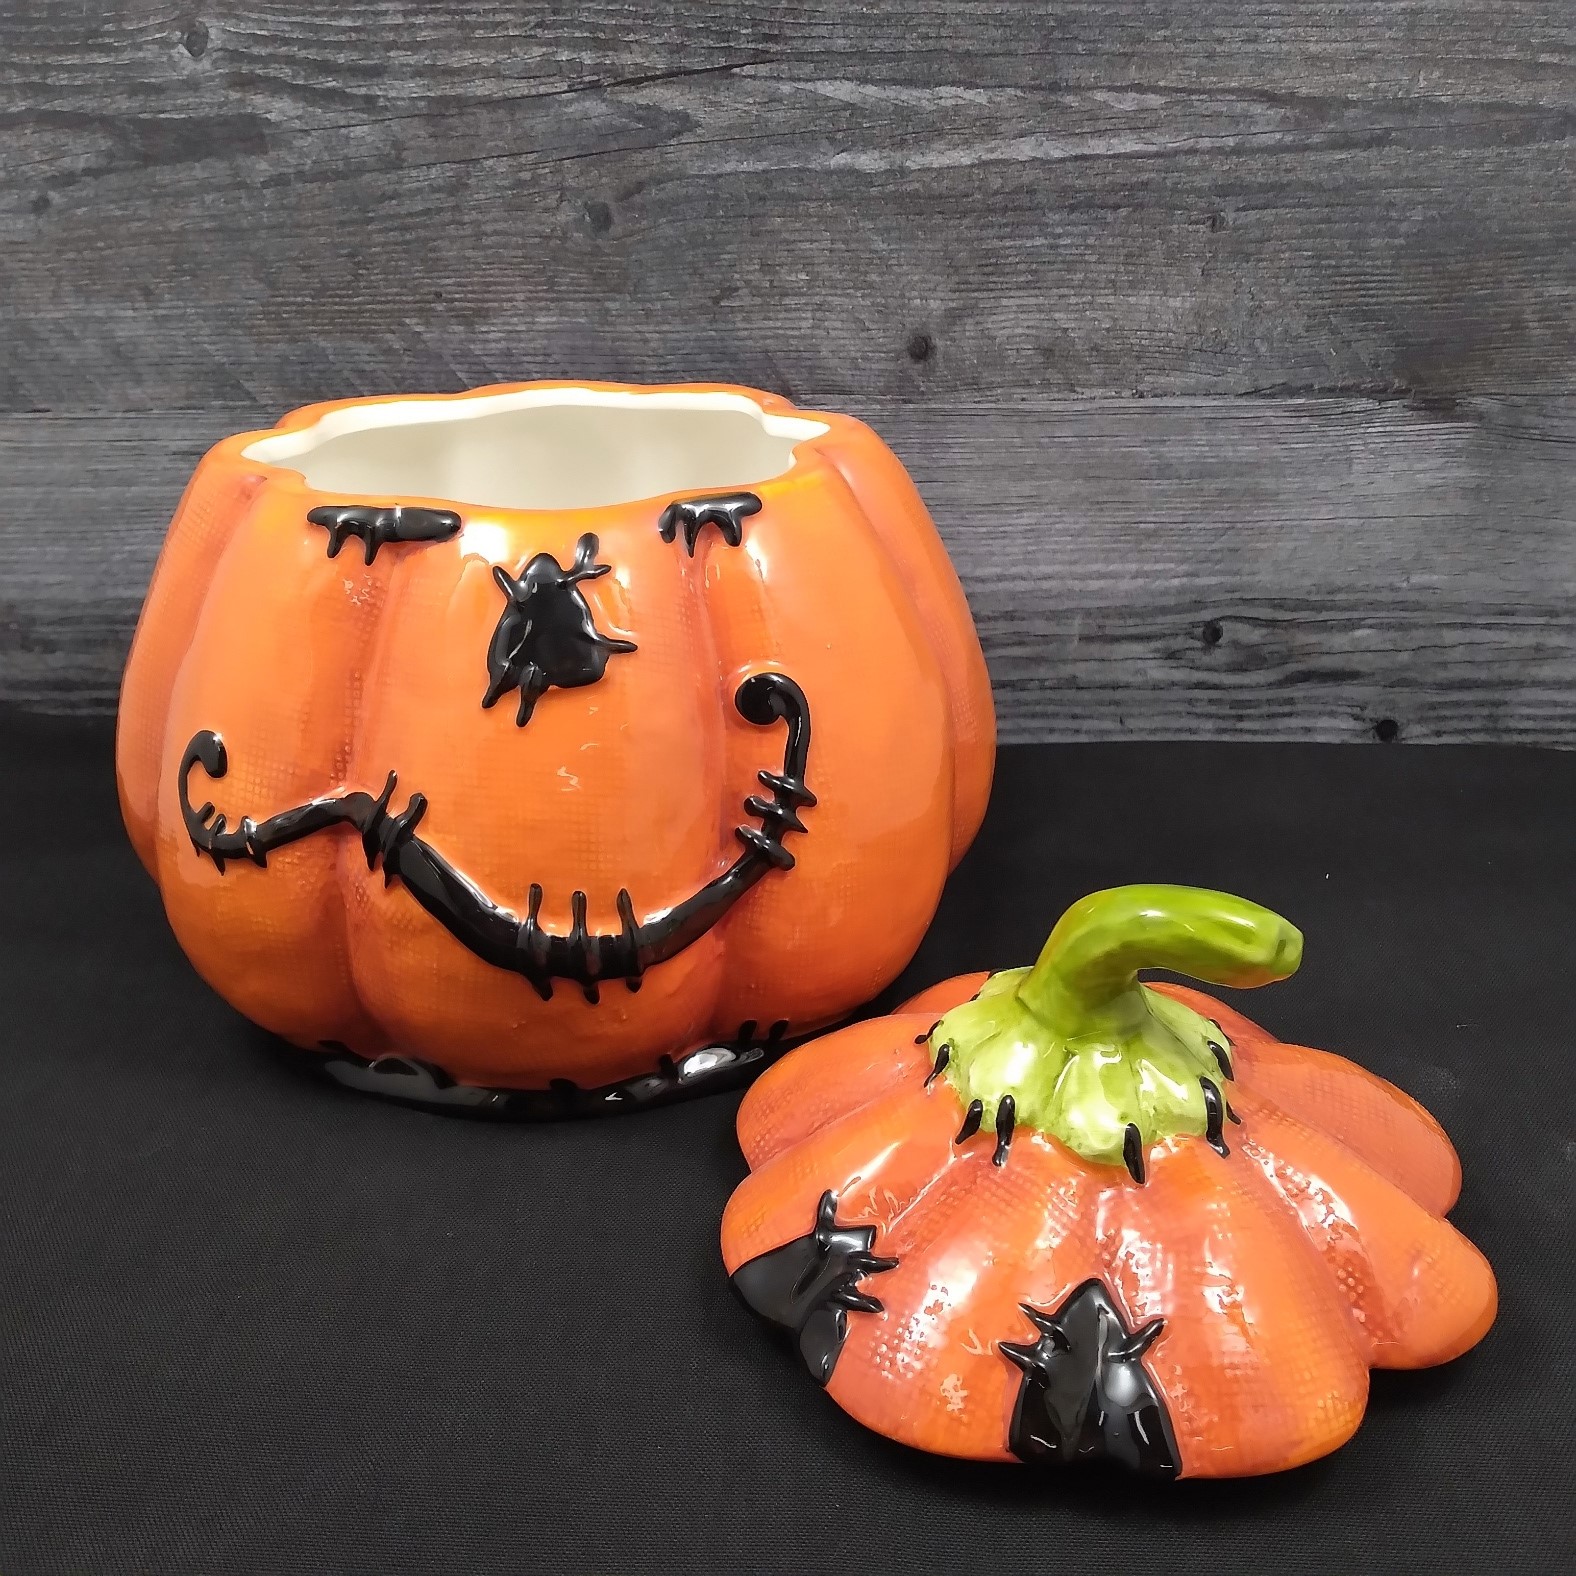 This Halloween Pumpkin Stitched Canister Cookie Treat Candy Jar by Blue Sky Clayworks is made with love by Premier Homegoods! Shop more unique gift ideas today with Spots Initiatives, the best way to support creators.